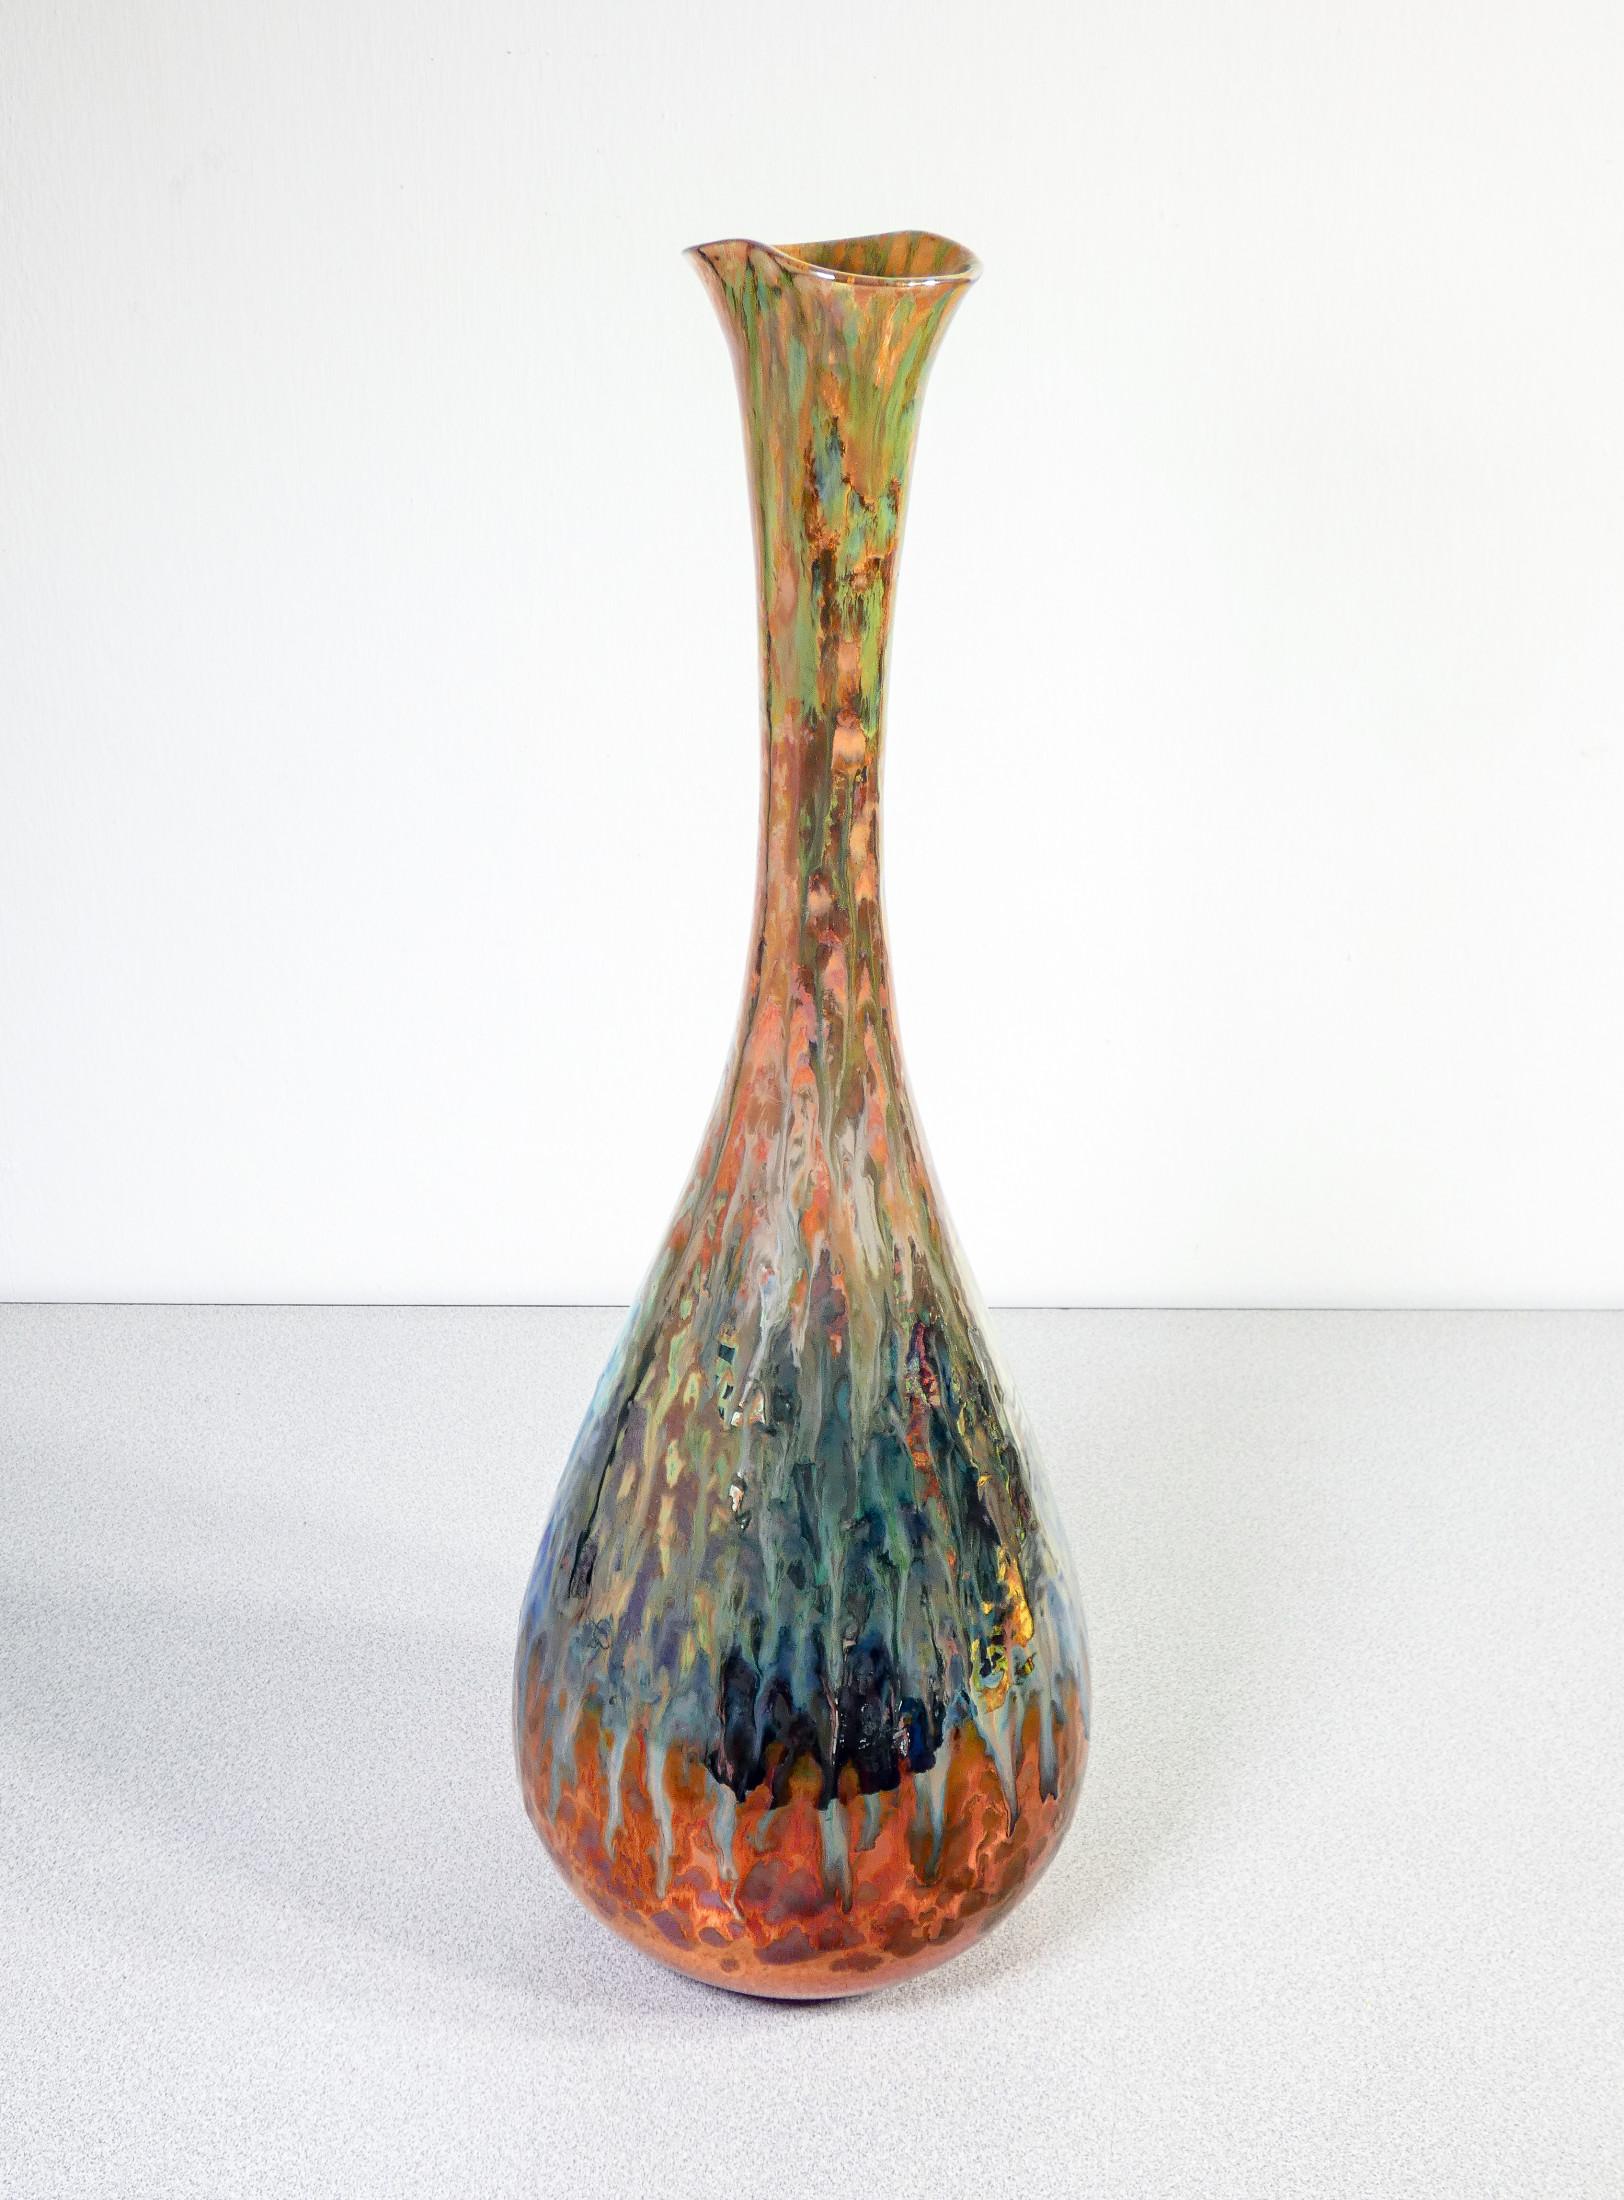 Cermic vase signed
Vittoria MAZZOTTI,
enameled and decorated
lustre.
Albisola Italy,
Mid-twentieth century

ORIGIN
Albisola, Italy

PERIOD
Mid-twentieth century

AUTHOR
Vittoria MAZZOTTI
(Albisola 1907-1985), daughter of Giuseppe Mazzotti and sister